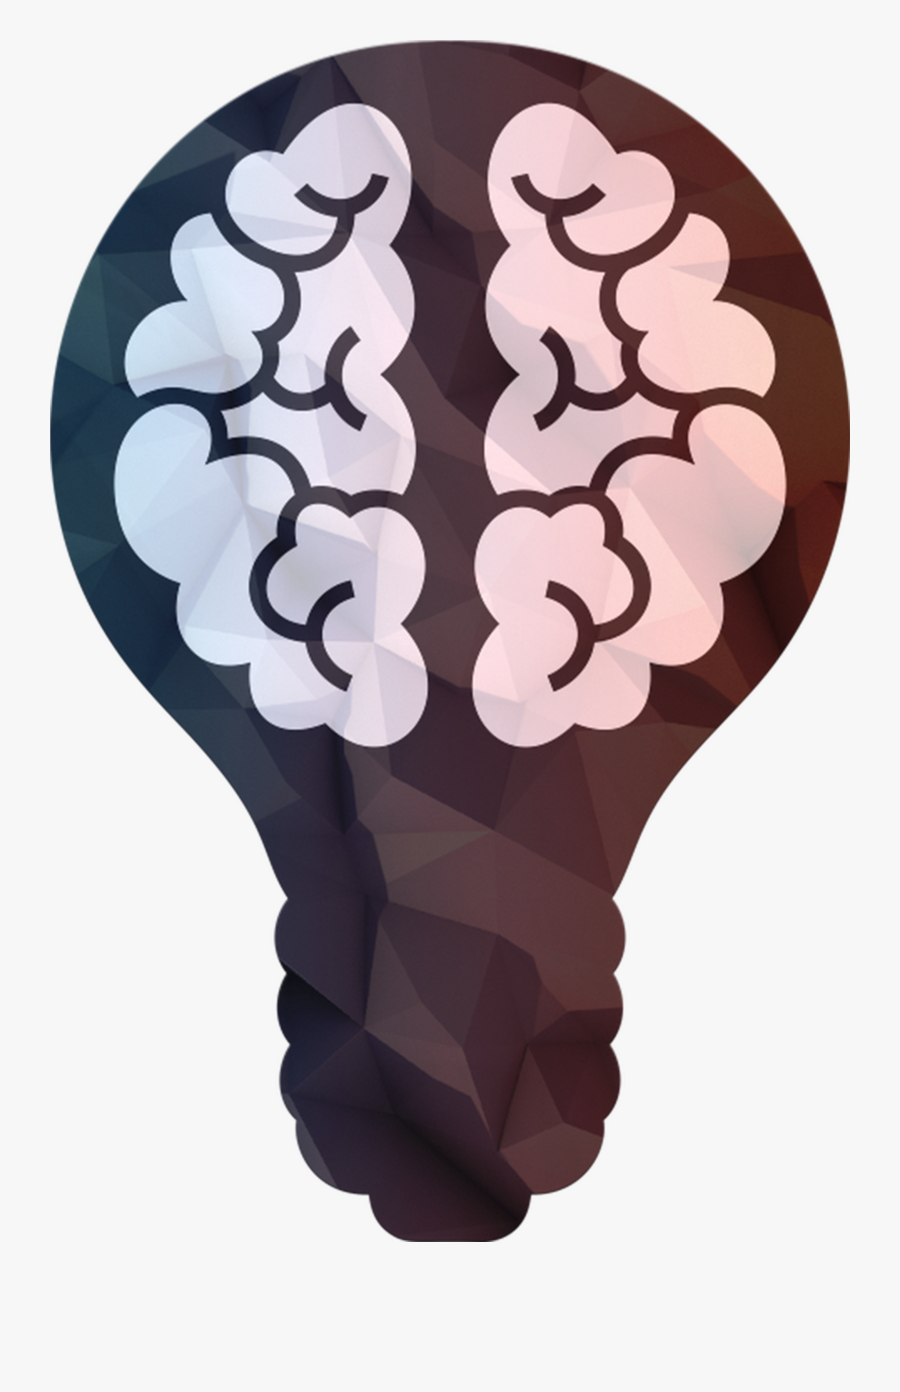 In Order To Be Successful, The Therapist Must Develop - Icon Of Light Bulb, Transparent Clipart